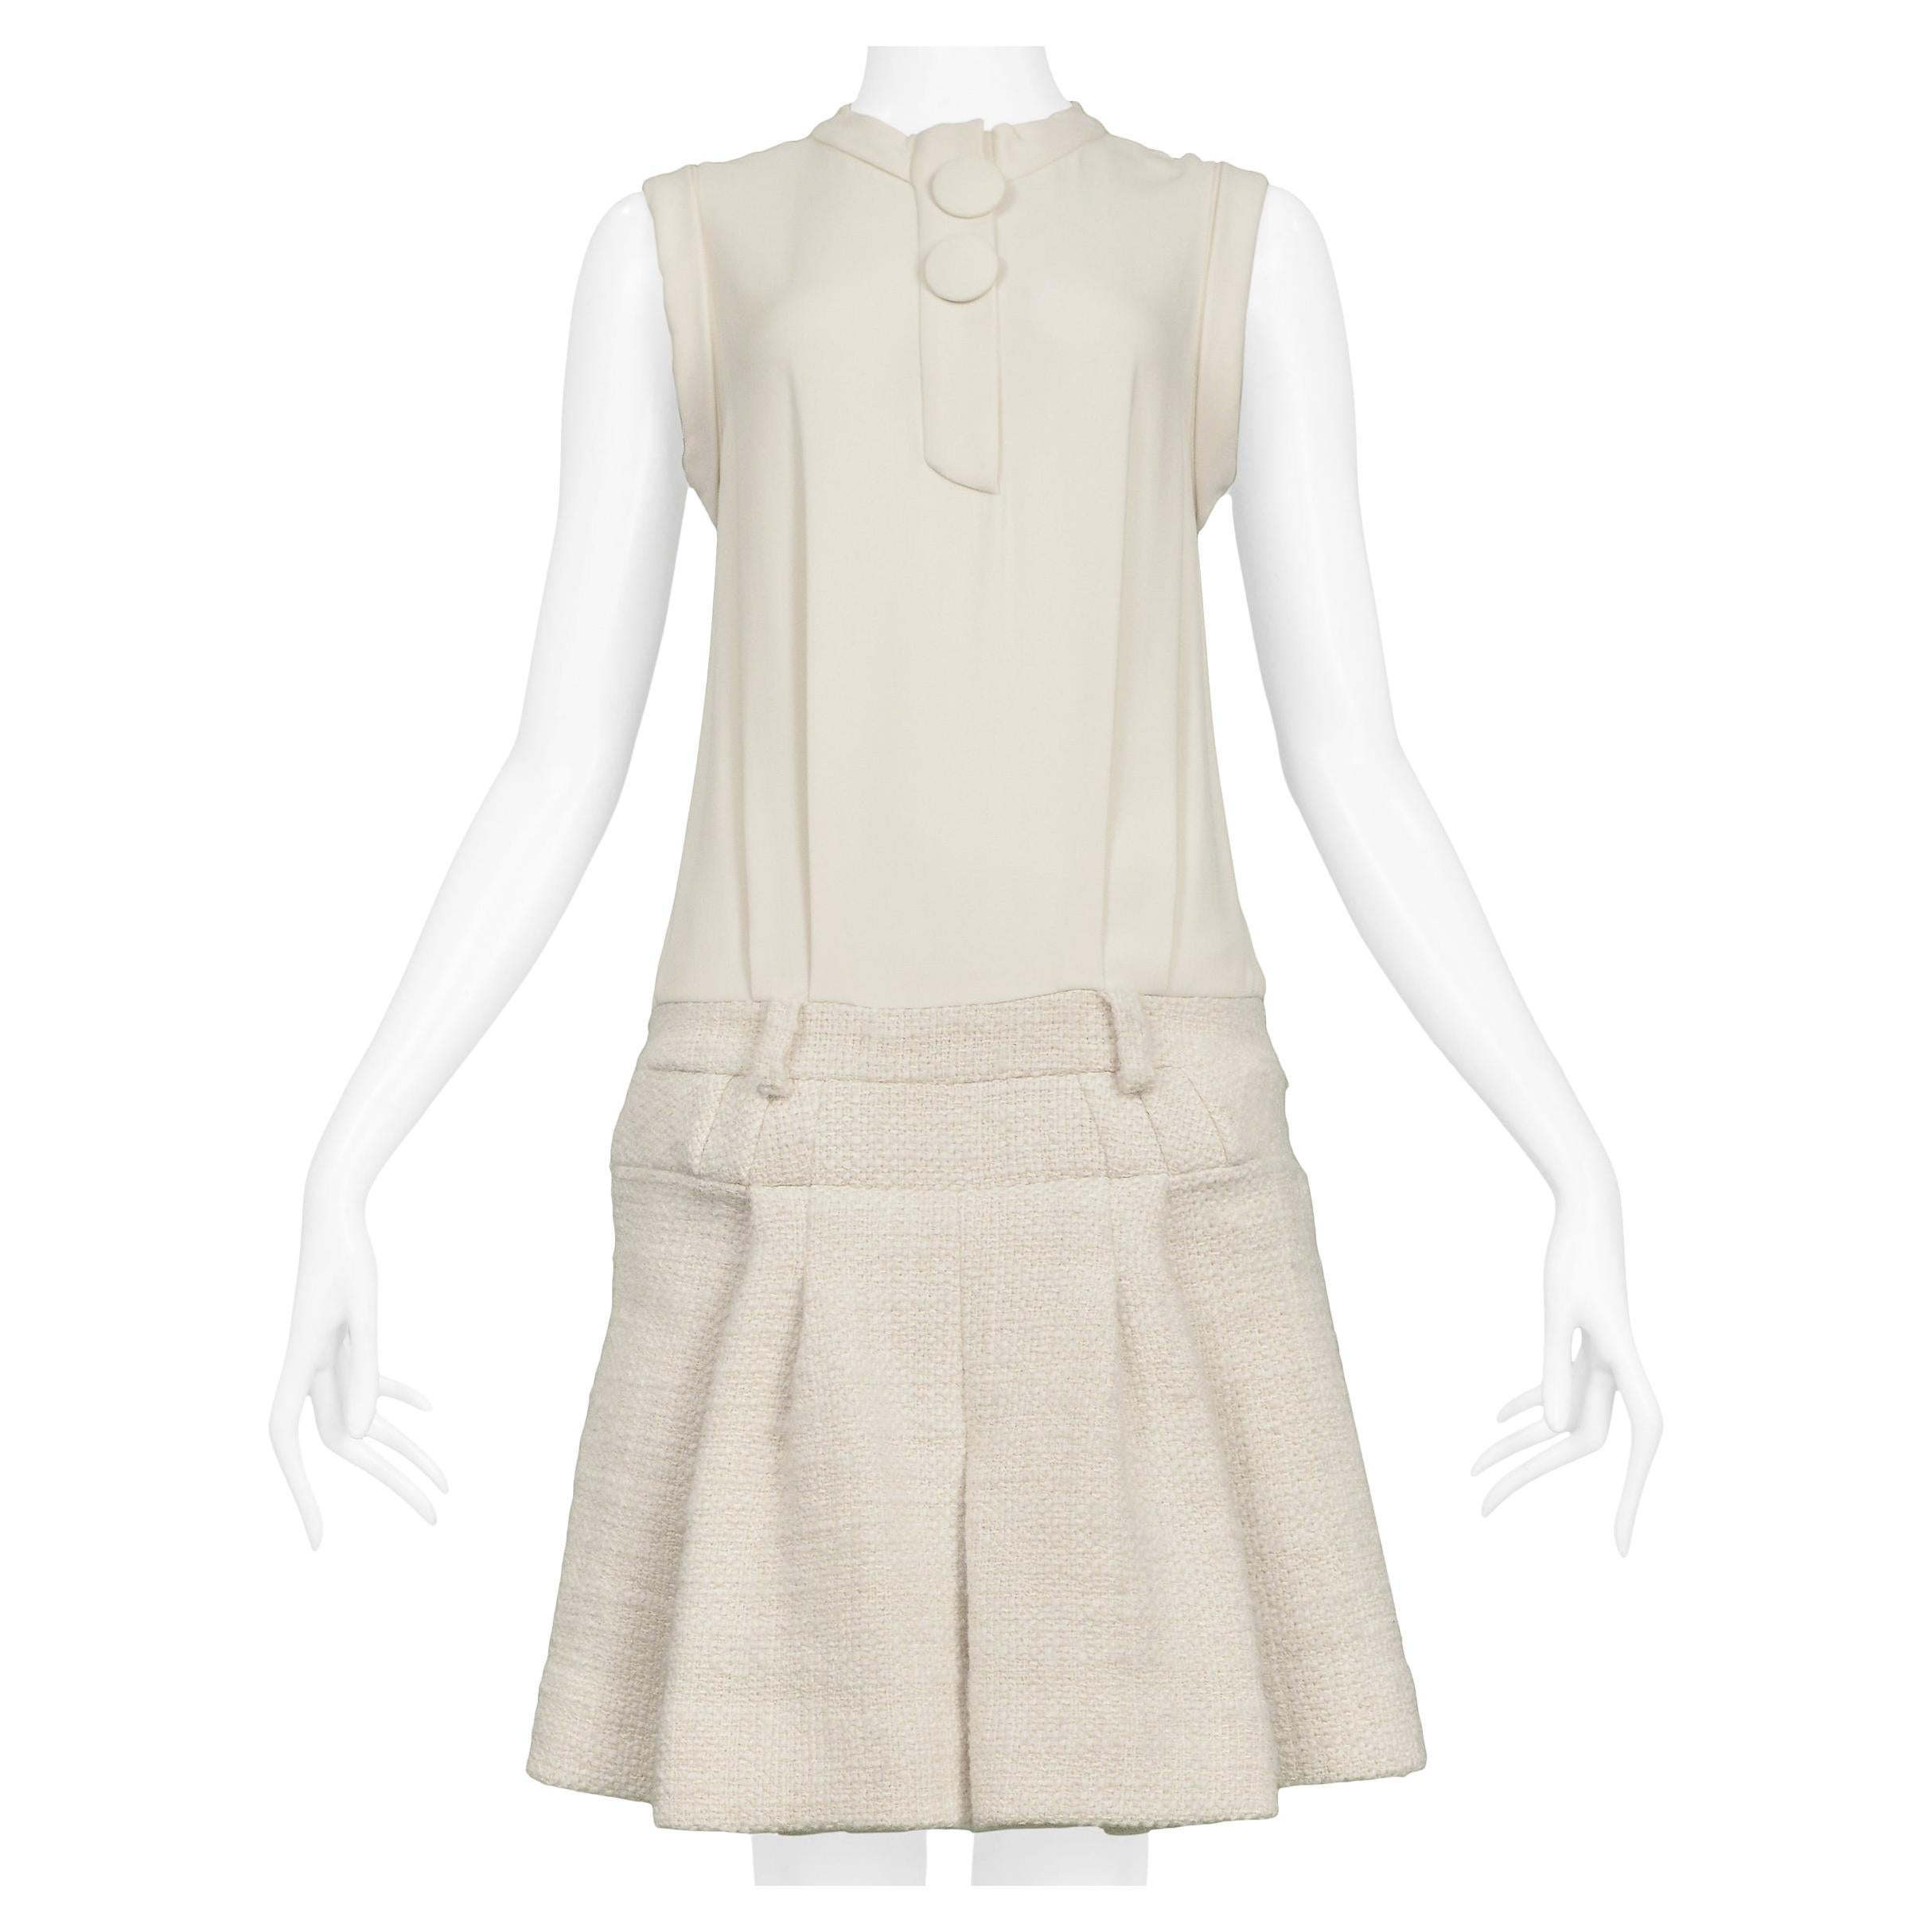 Balenciaga By Ghesquiere Off-White Box Pleat Dress 2006 For Sale